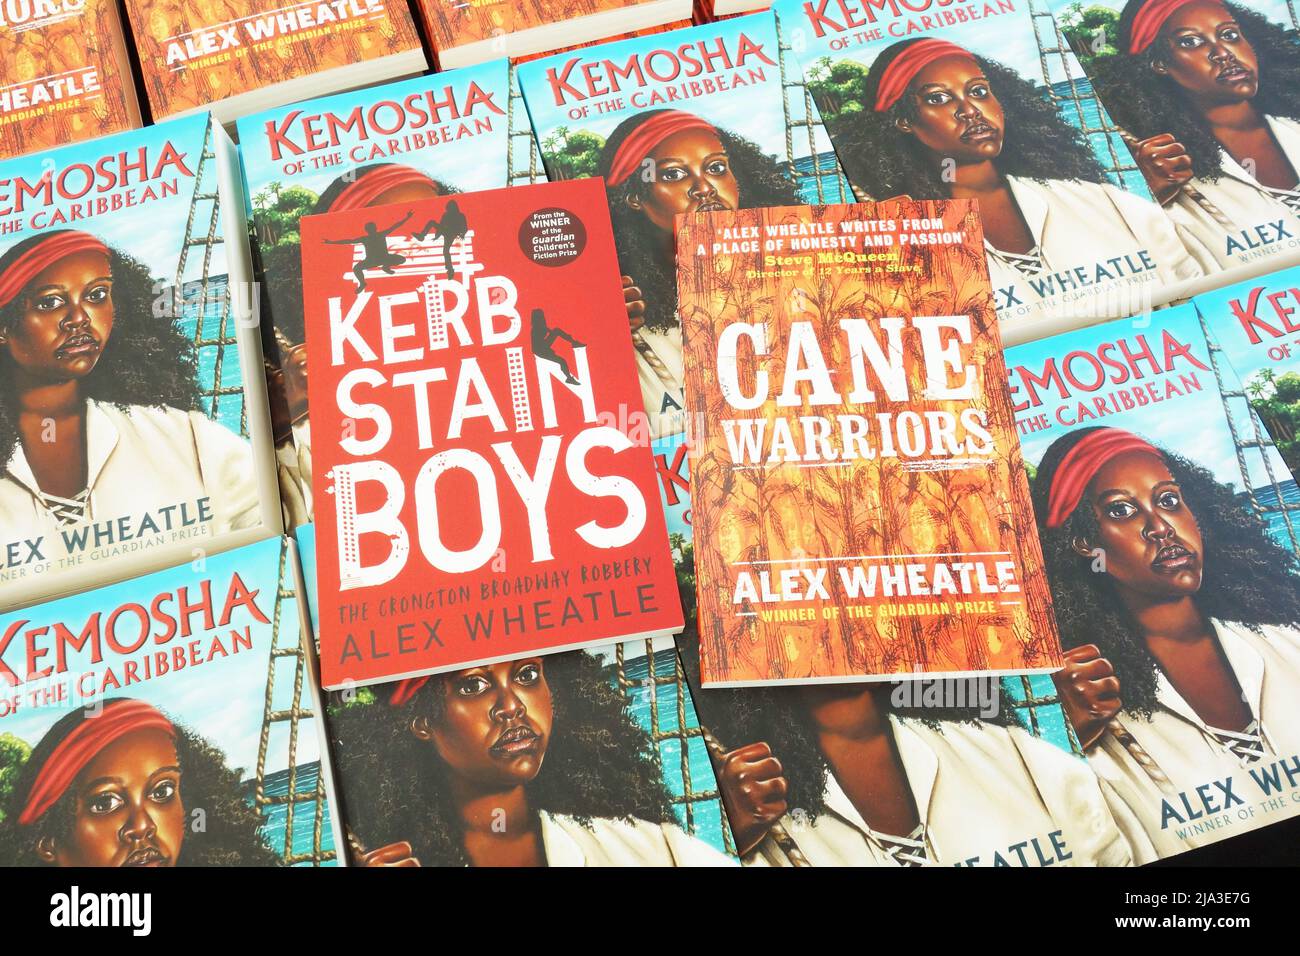 Books by author Alex Wheatle including Cane Warriors and Kerb Stain Boys Stock Photo